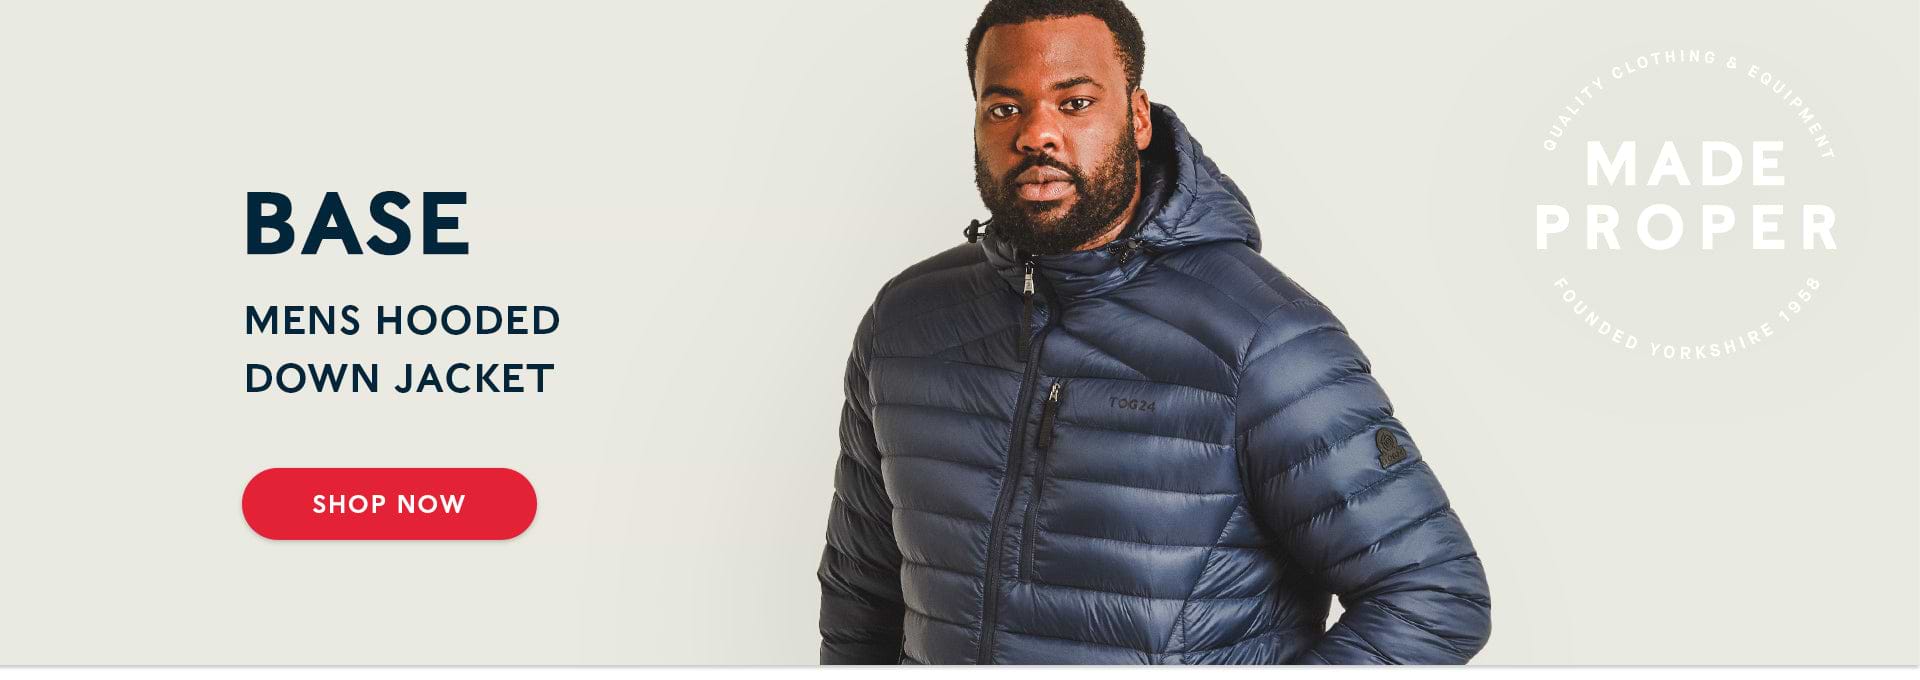 Base Mens Hooded Down Jacket | Shop Now